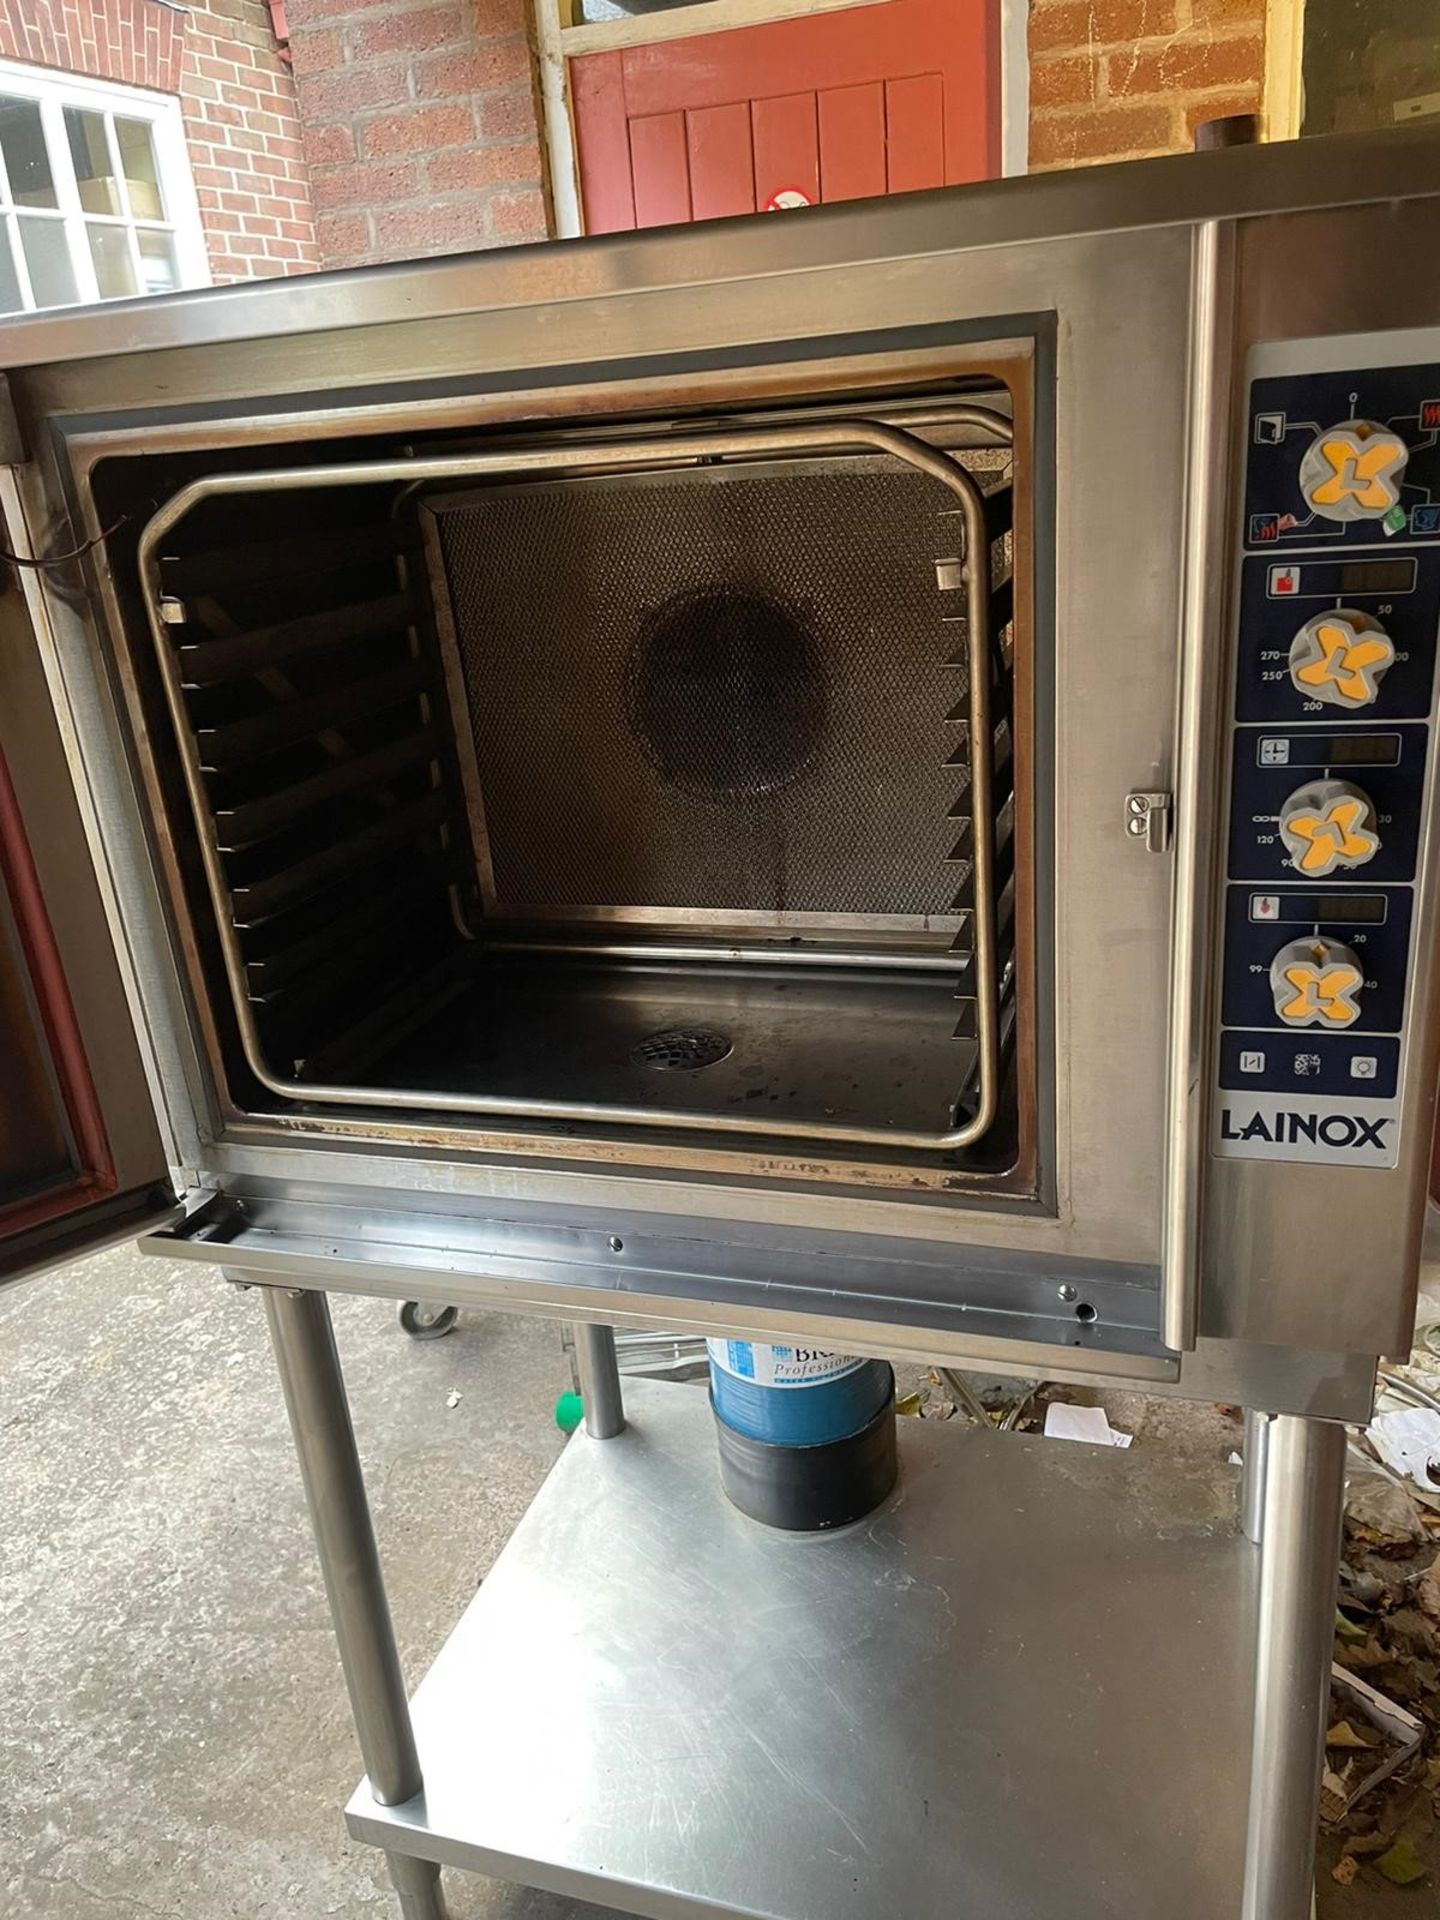 6 grid lainox combi oven with stand